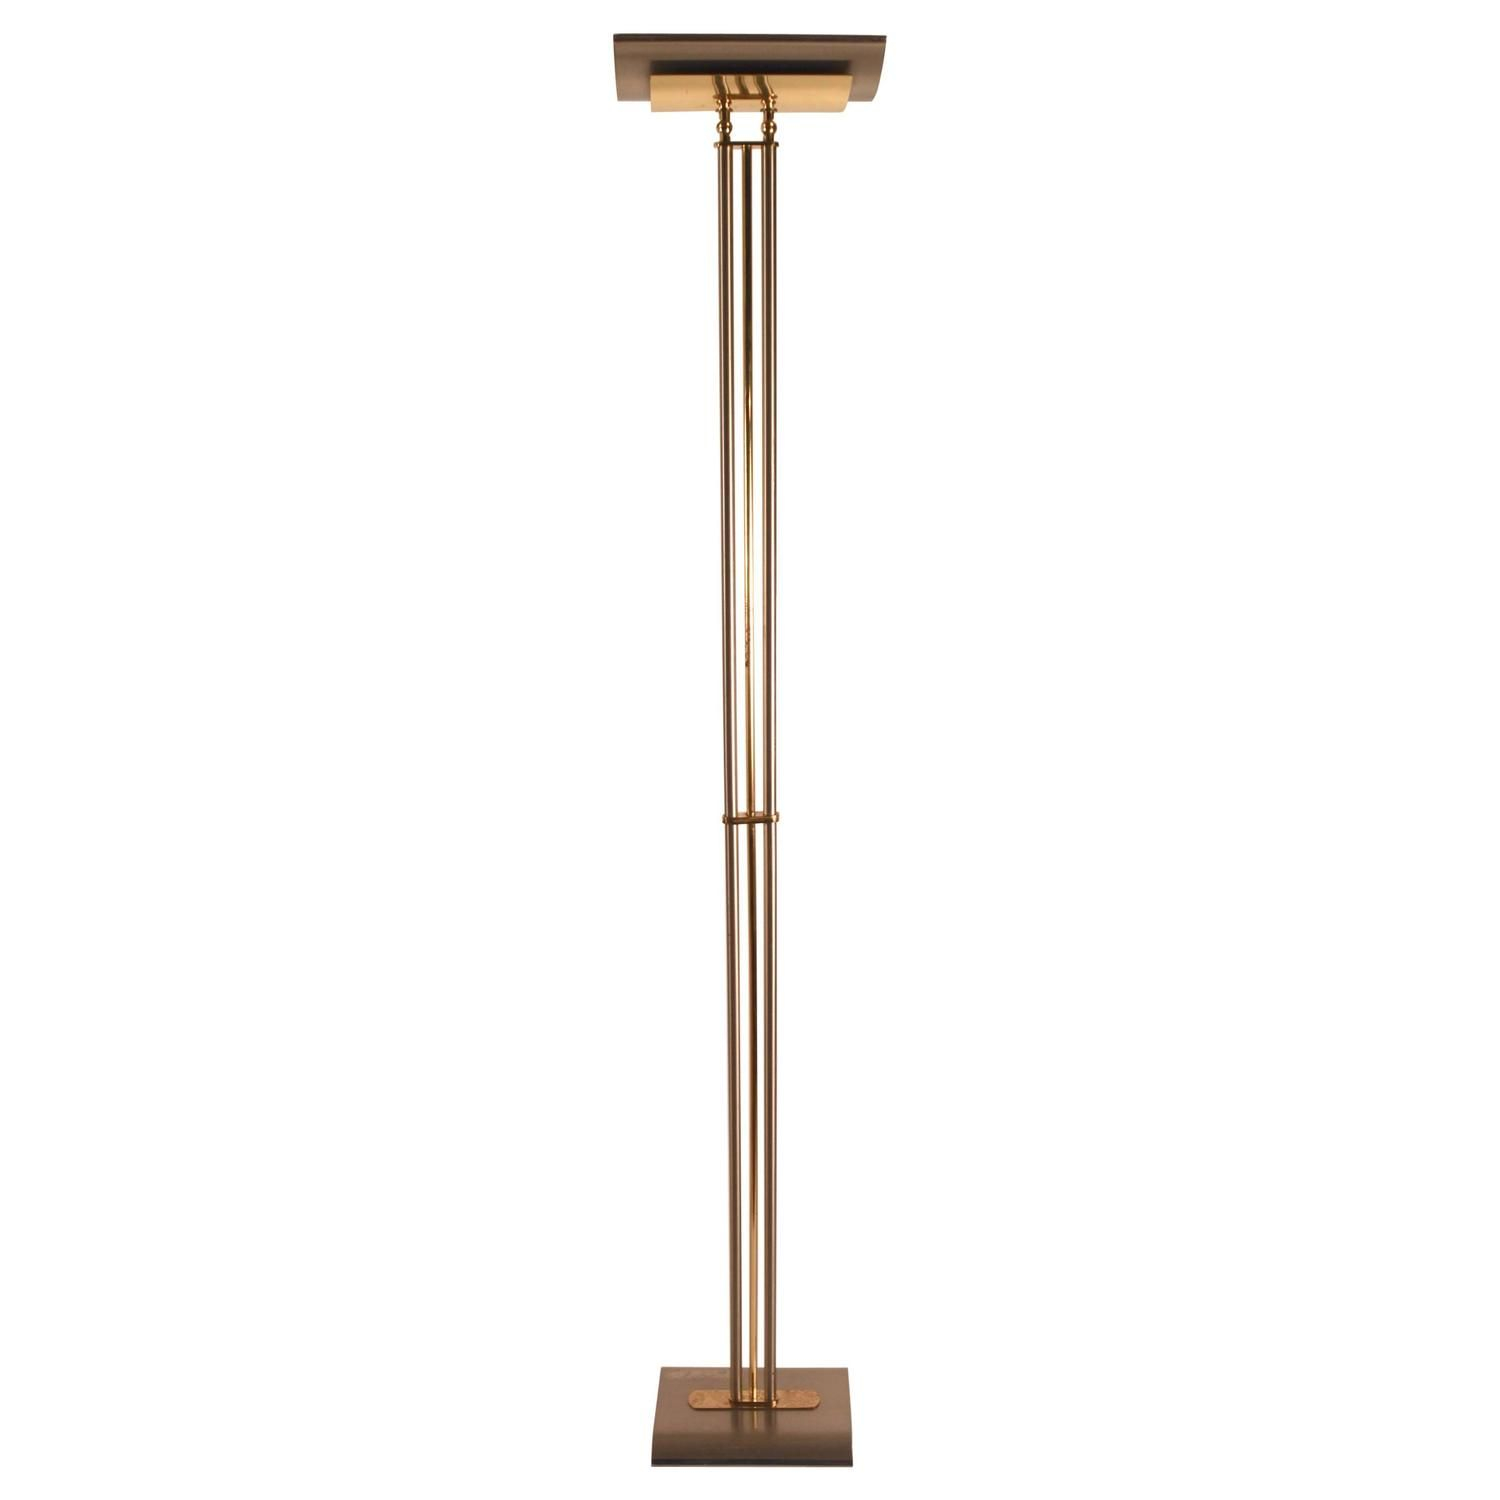 Italian Made Halogen Floor Lamp Torchiere Brass And Steel intended for sizing 1500 X 1500